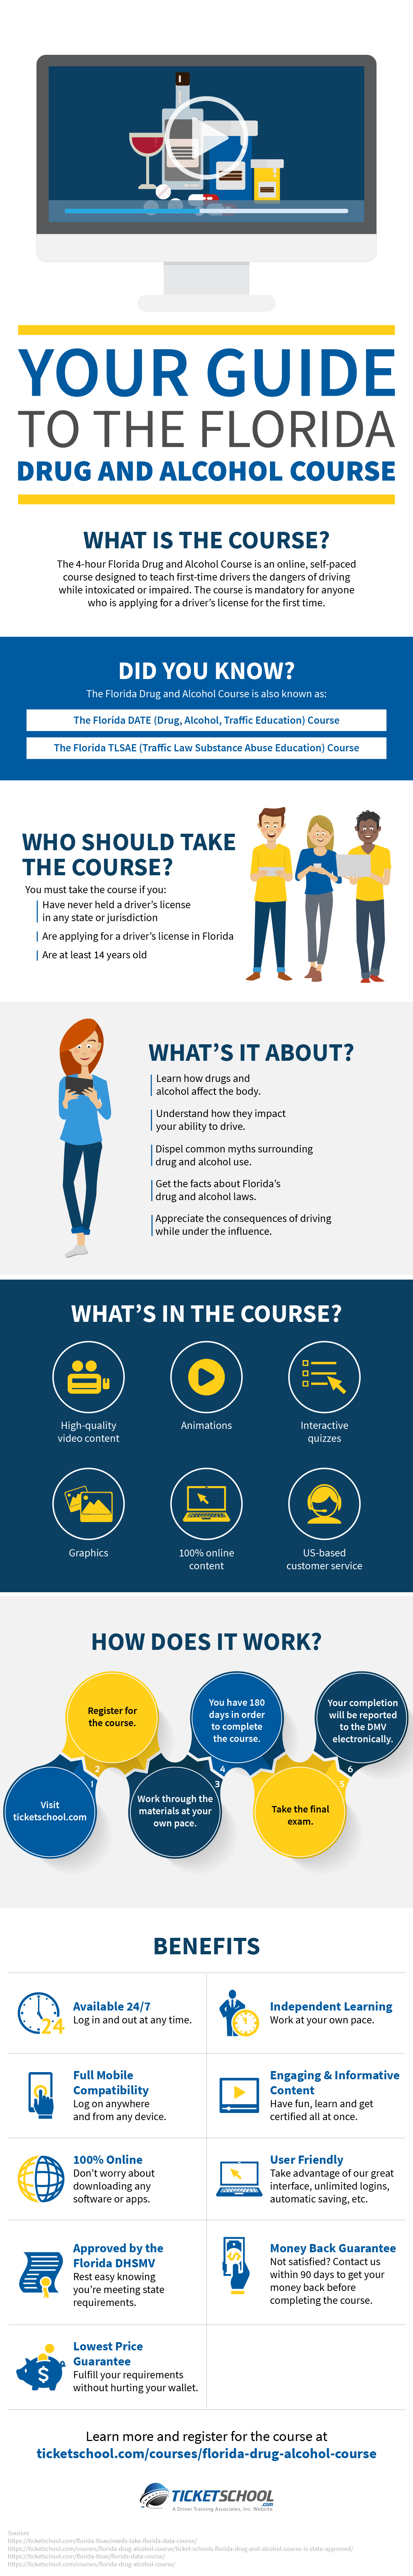 Your Guide to the Florida Drug and Alcohol Course Infographic